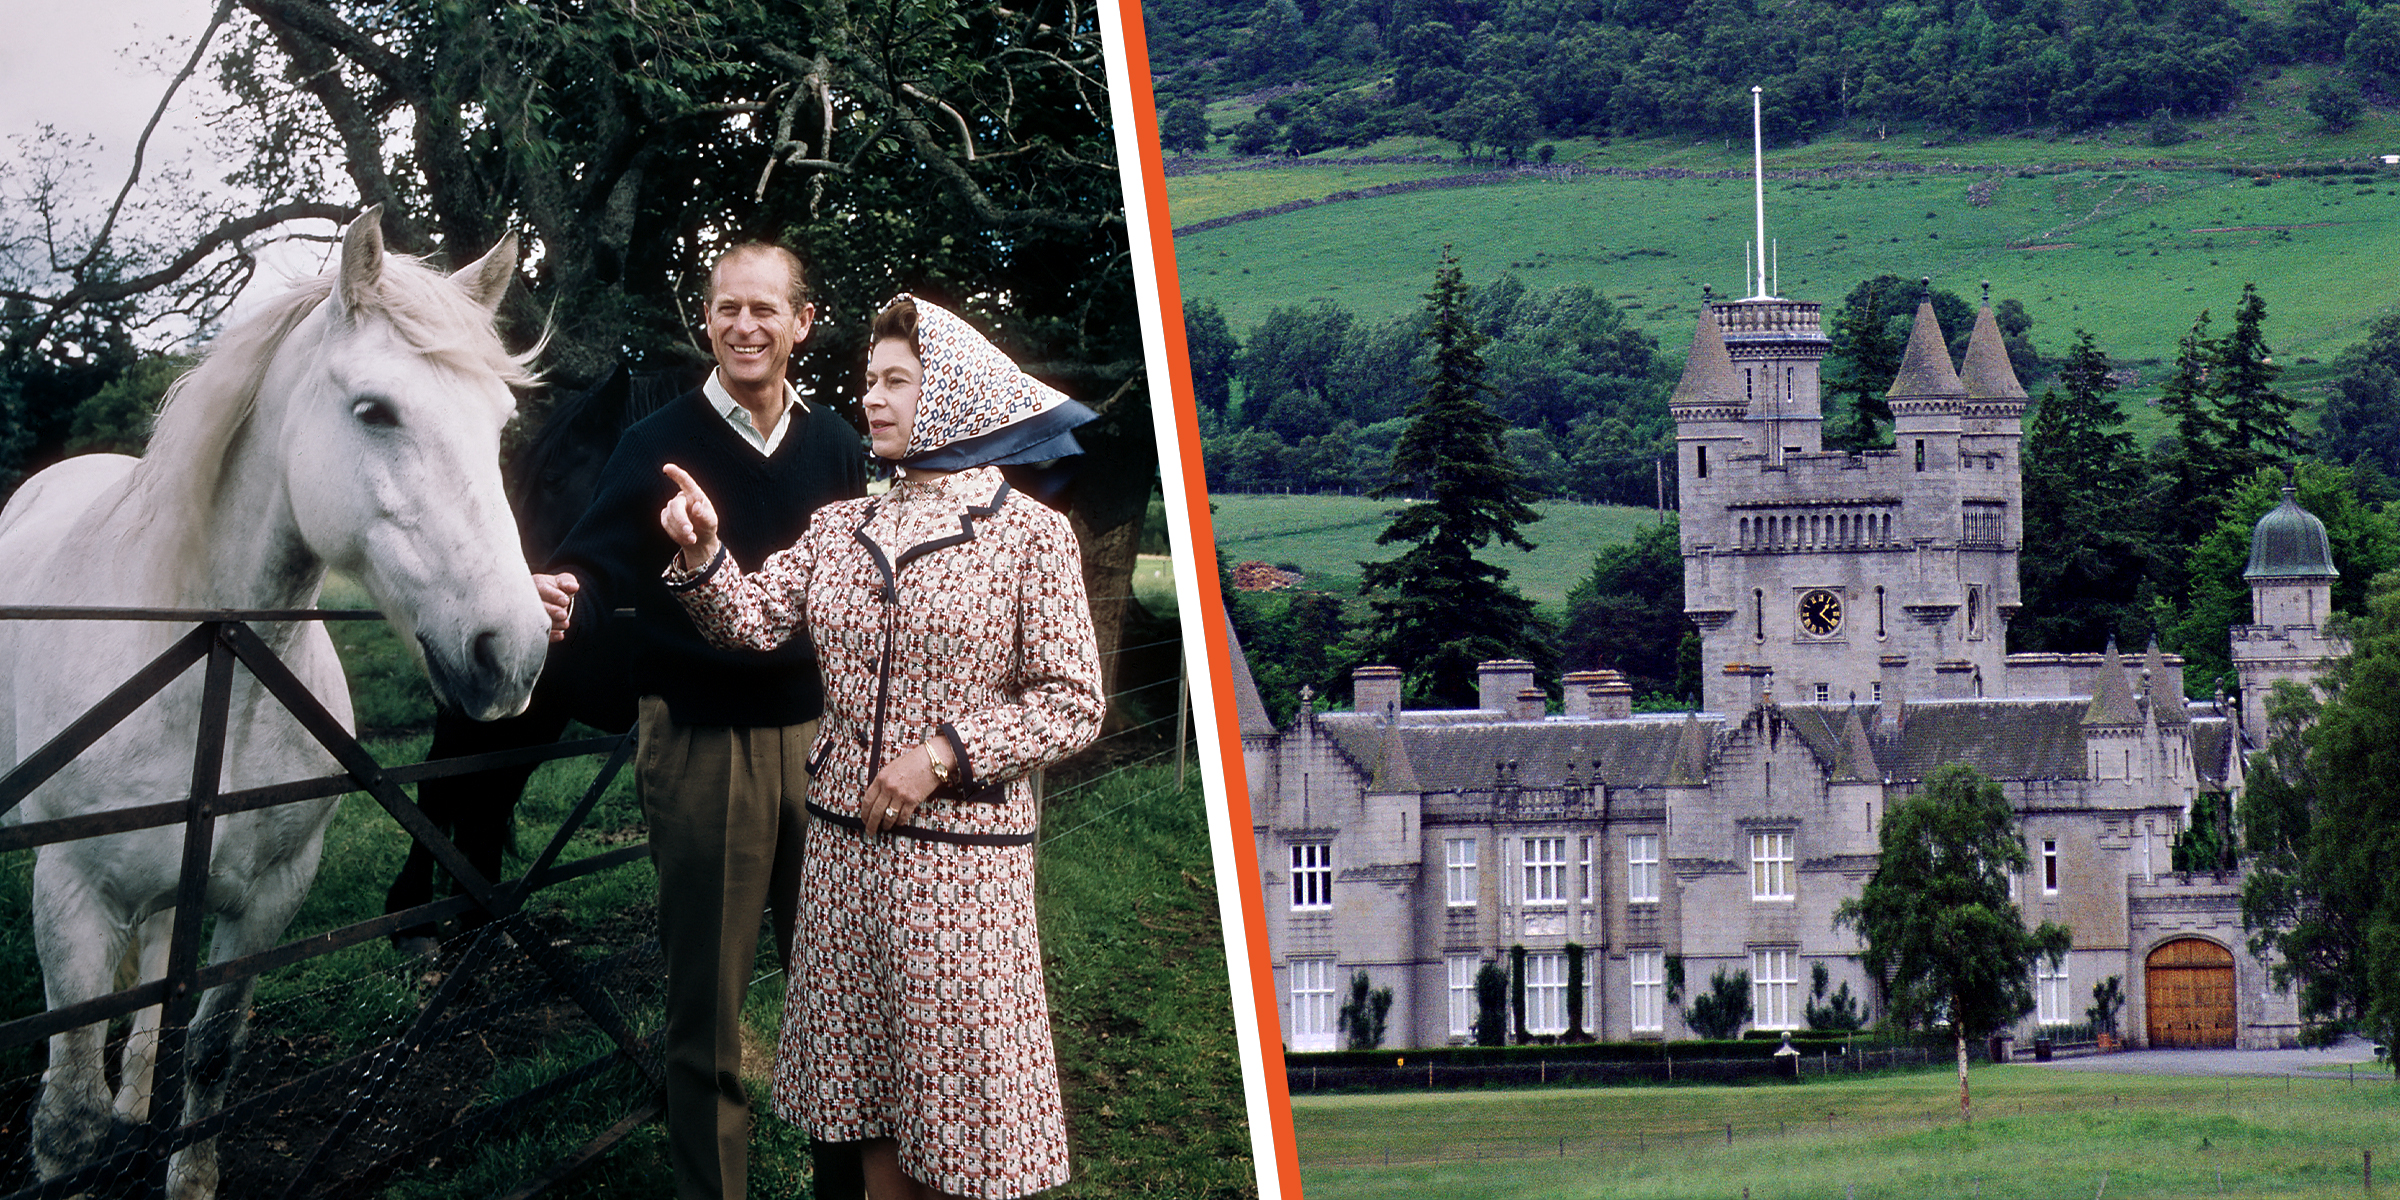 Queen Elizabeth II and Prince Phillip | The Balmoral Castle | Source: Getty Images